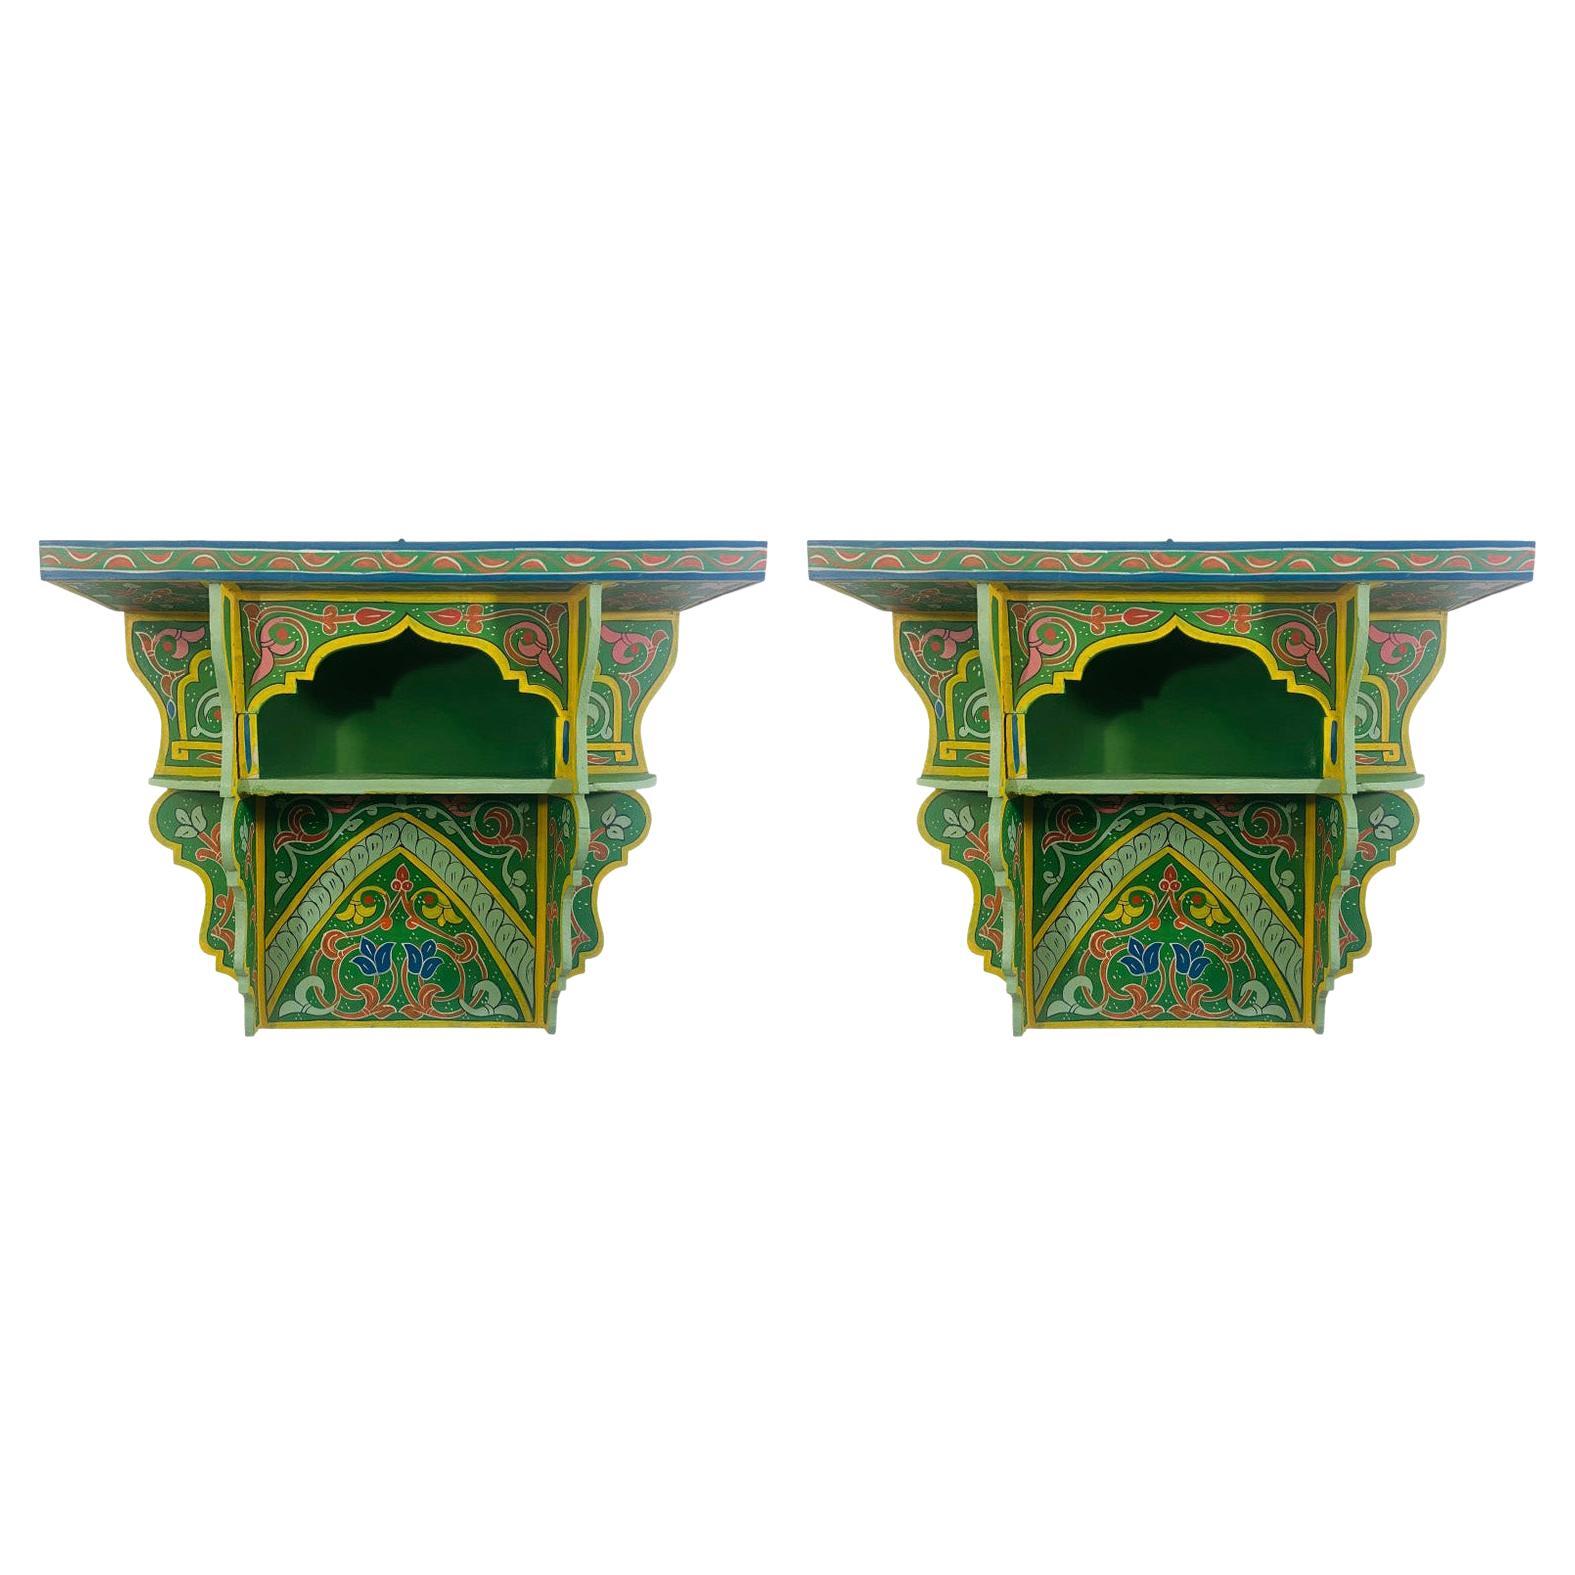 Vintage Green Moroccan Boho Chic Spice Shelf or Rack, a Pair For Sale